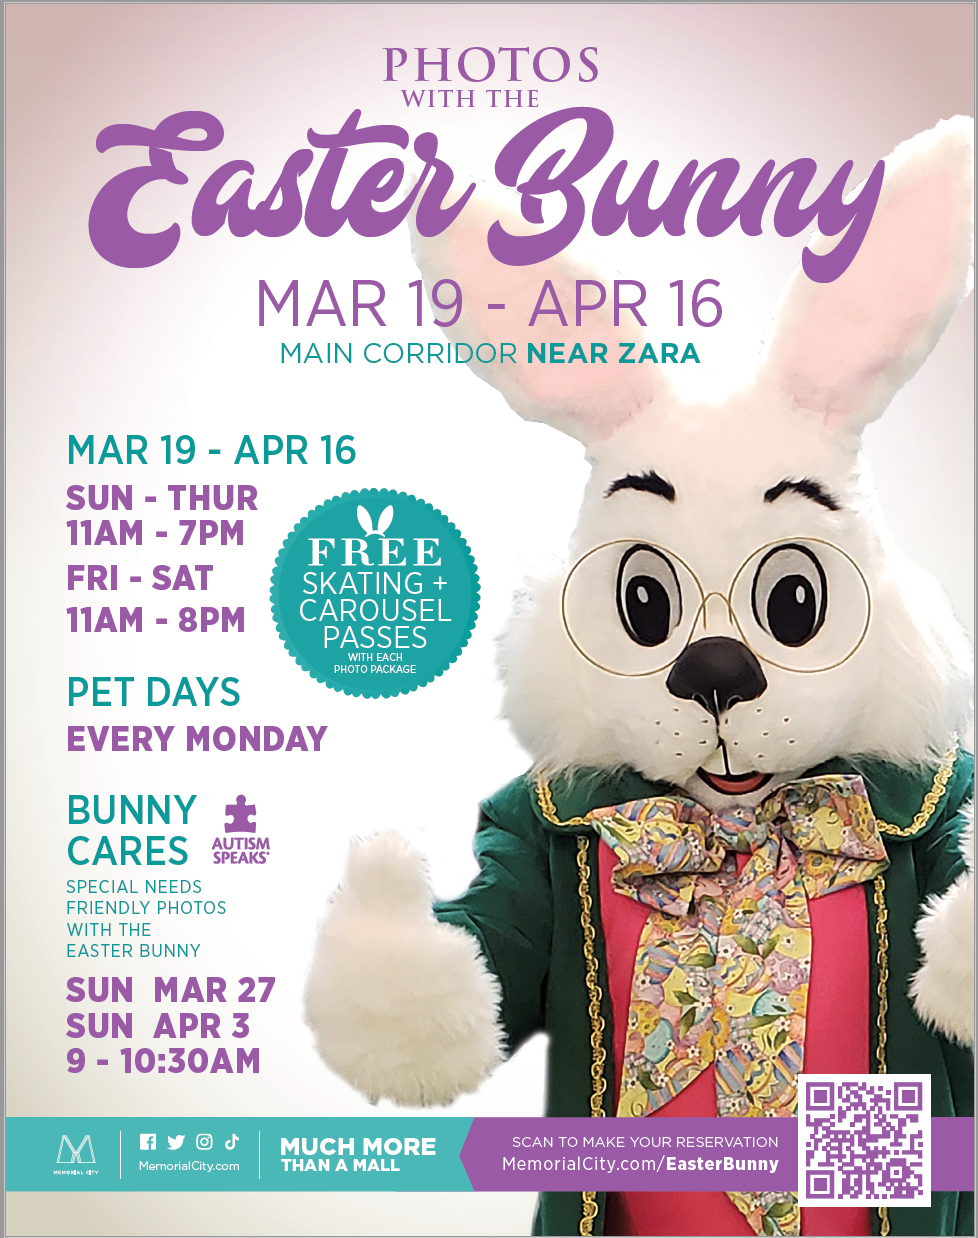 Visit the Easter Bunny at Memorial City Mall Memorial Management District